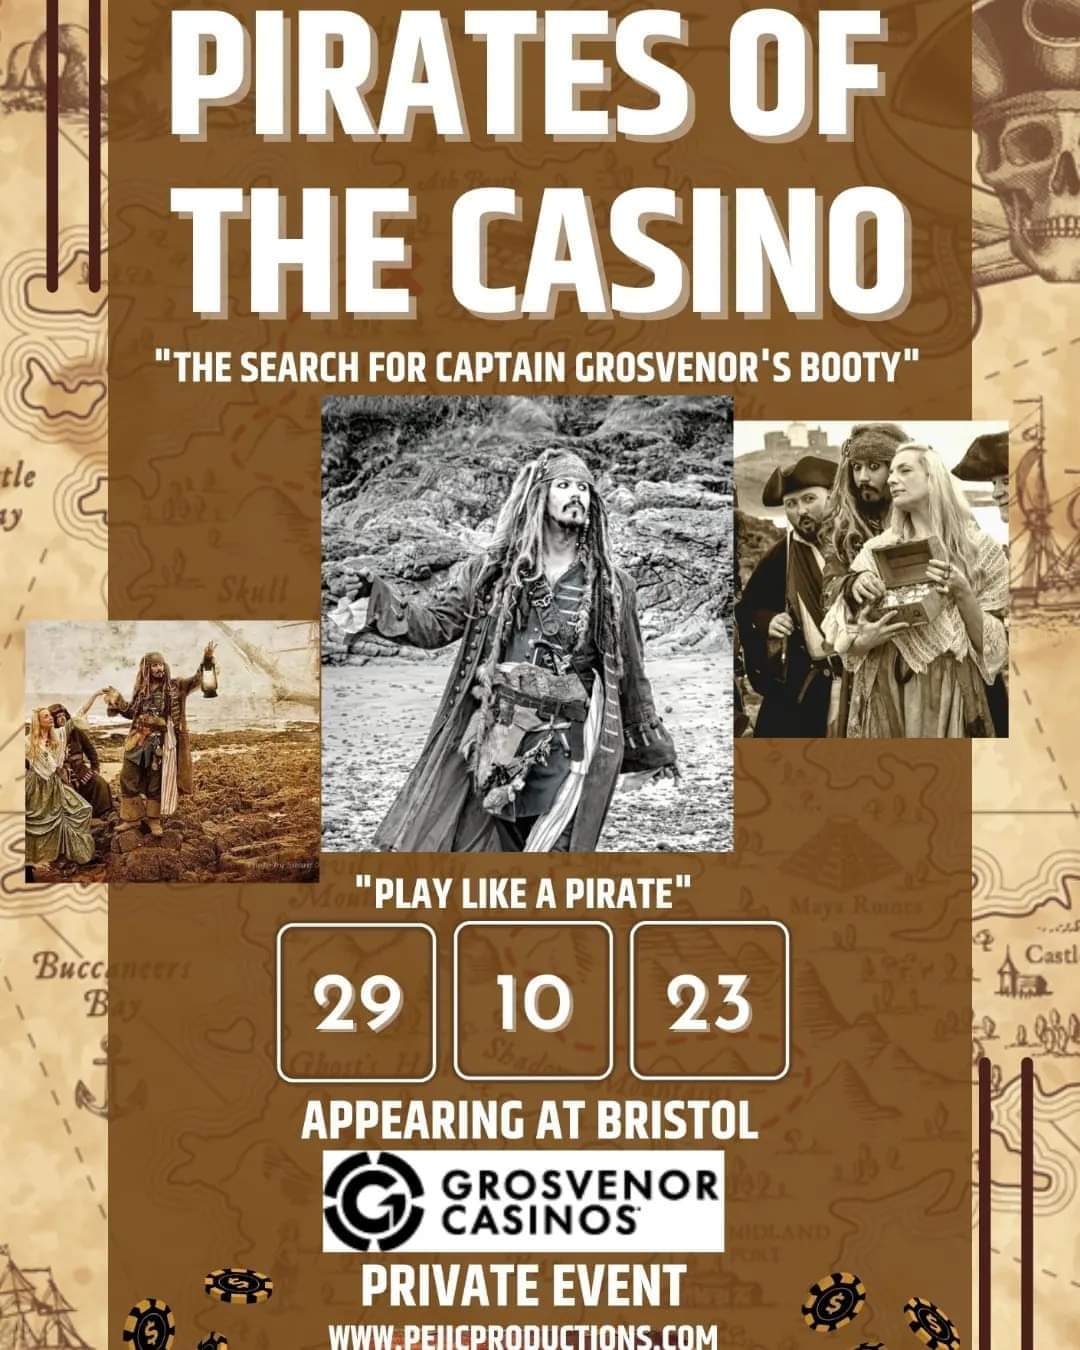 Stefan Pejic in 'Pirates of the Casino' show